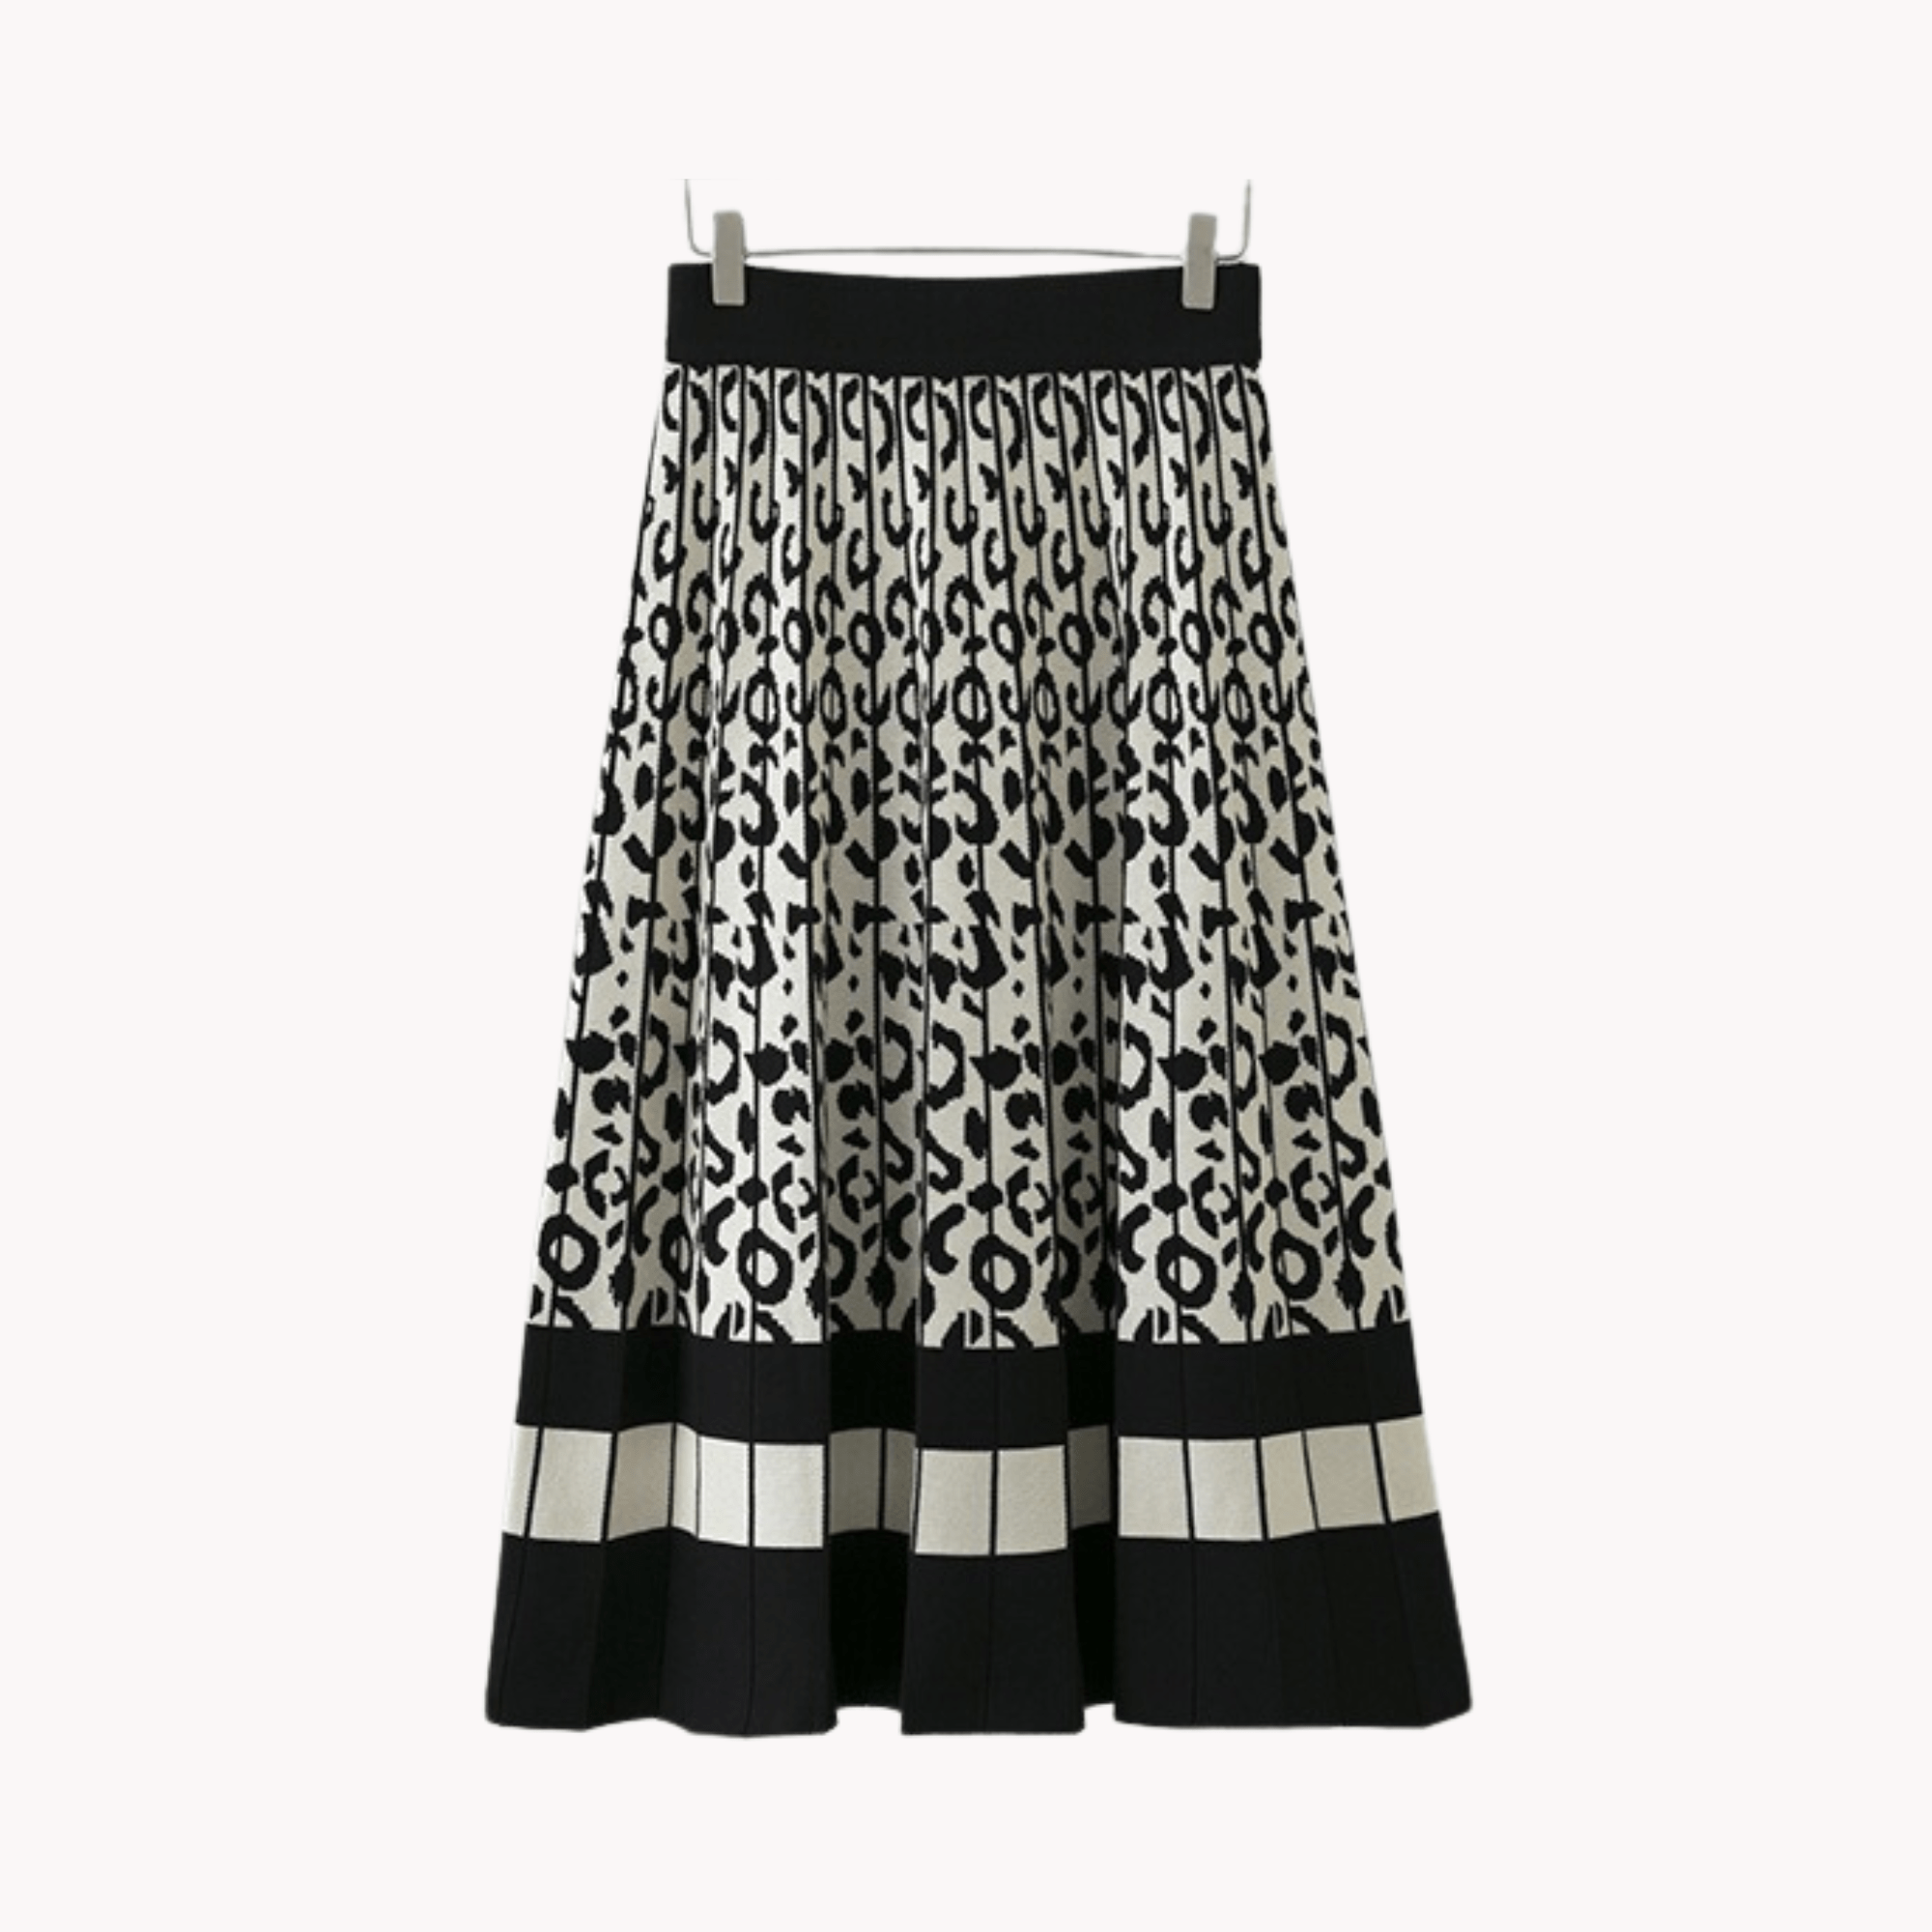 Lines and Curls Contrast Knitted Skirt - Kelly Obi New York